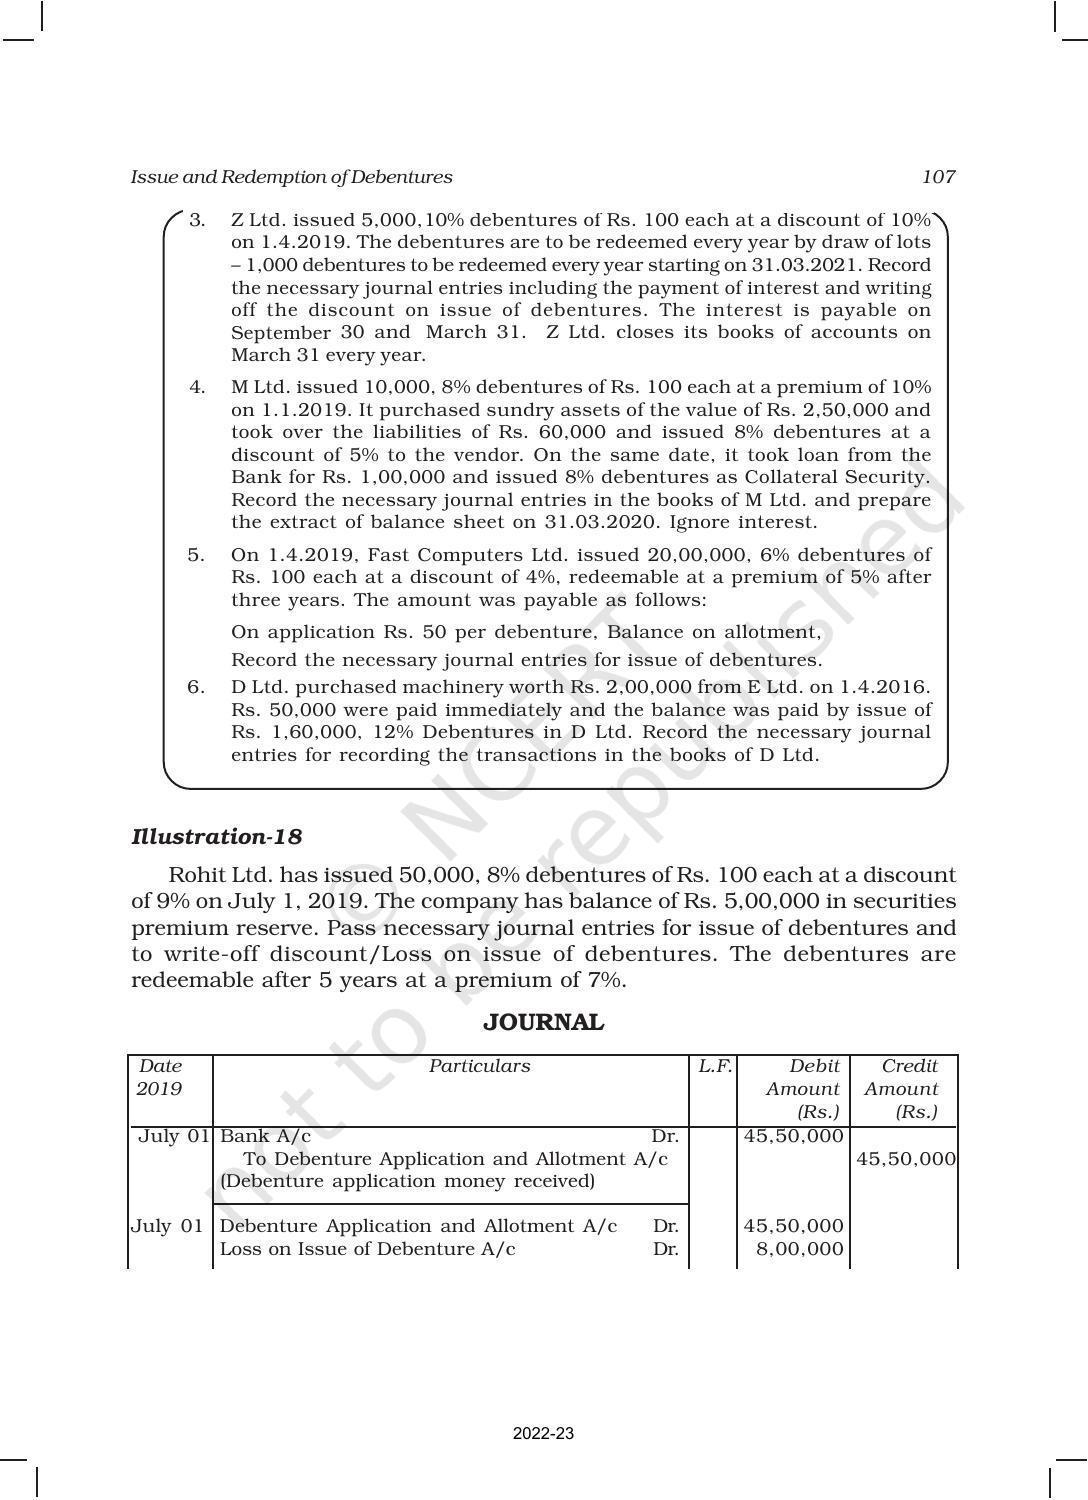 NCERT Book for Class 12 Accountancy Part II Chapter 1 Issue and Redemption of Debentures - Page 33